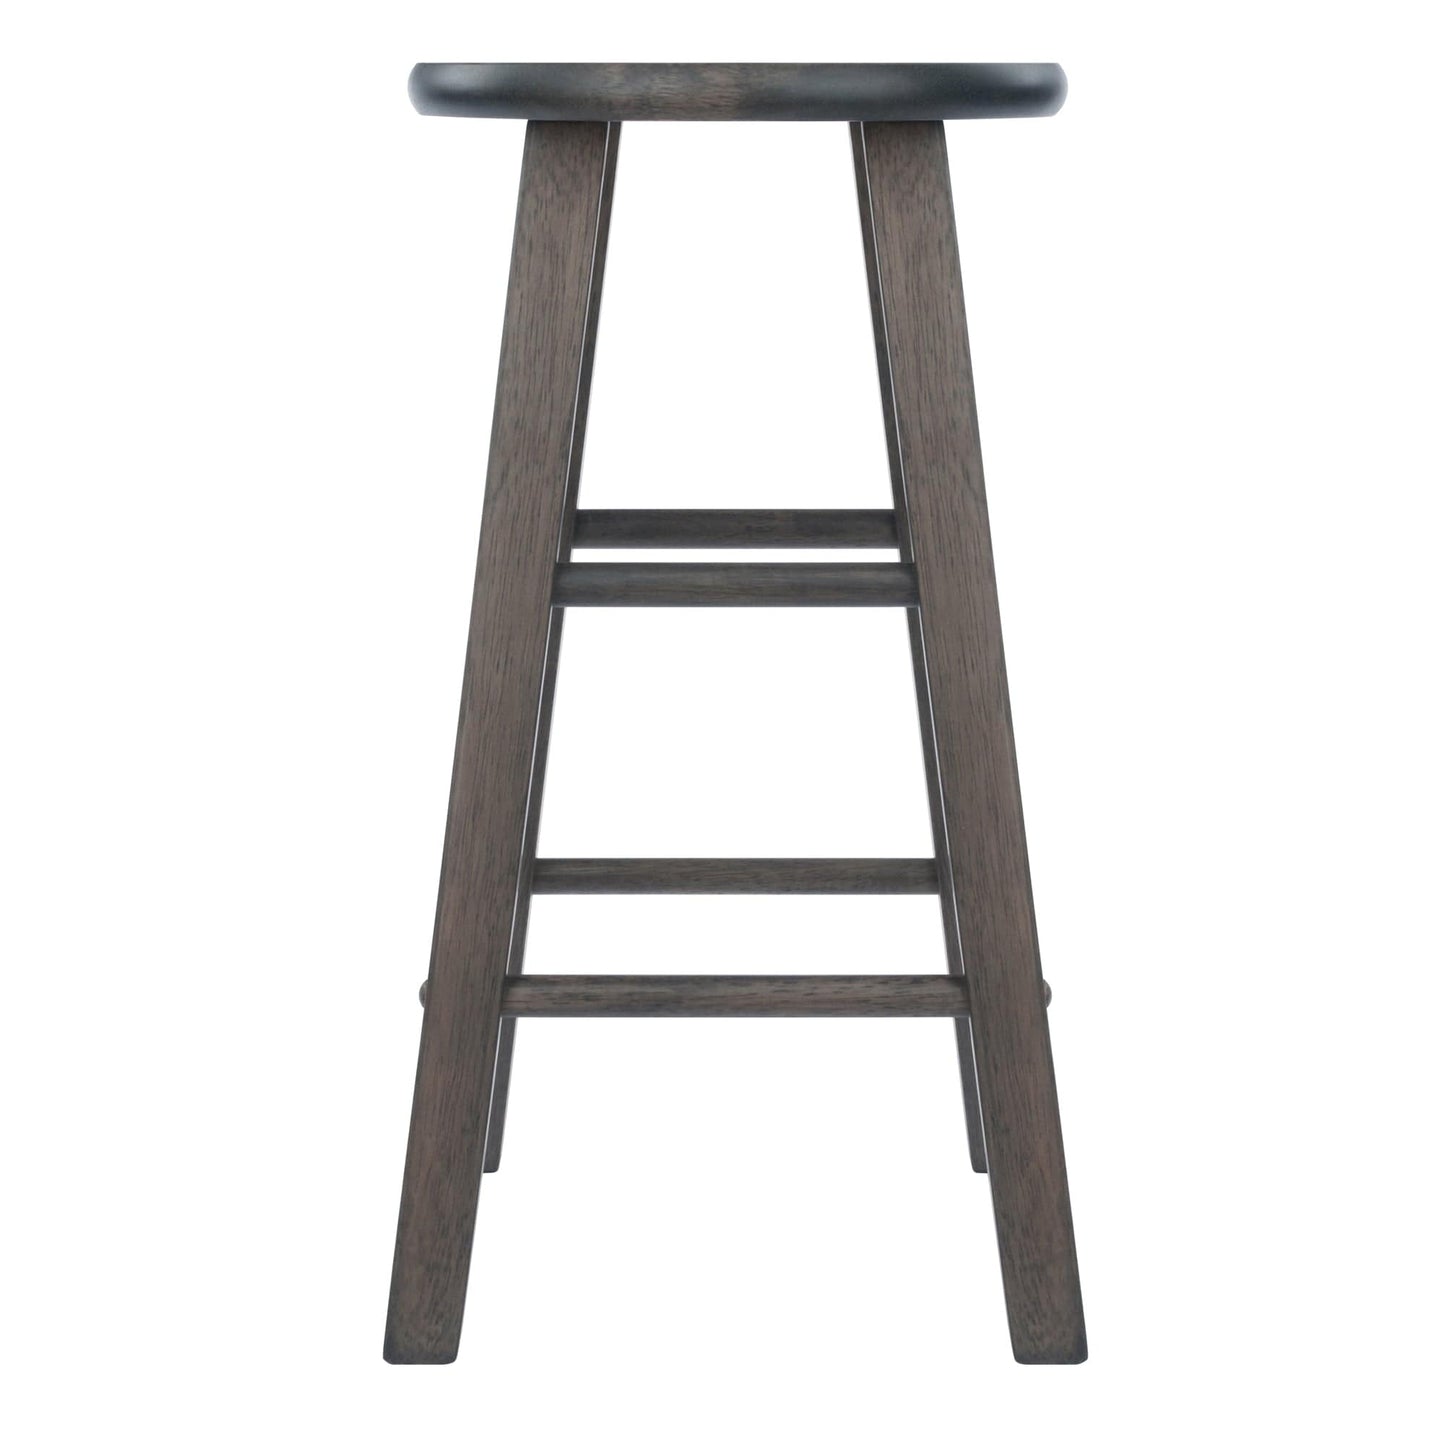 WINSOME Table & Bar Stools Element 2-Pc Counter Stool Set, Oyster Gray